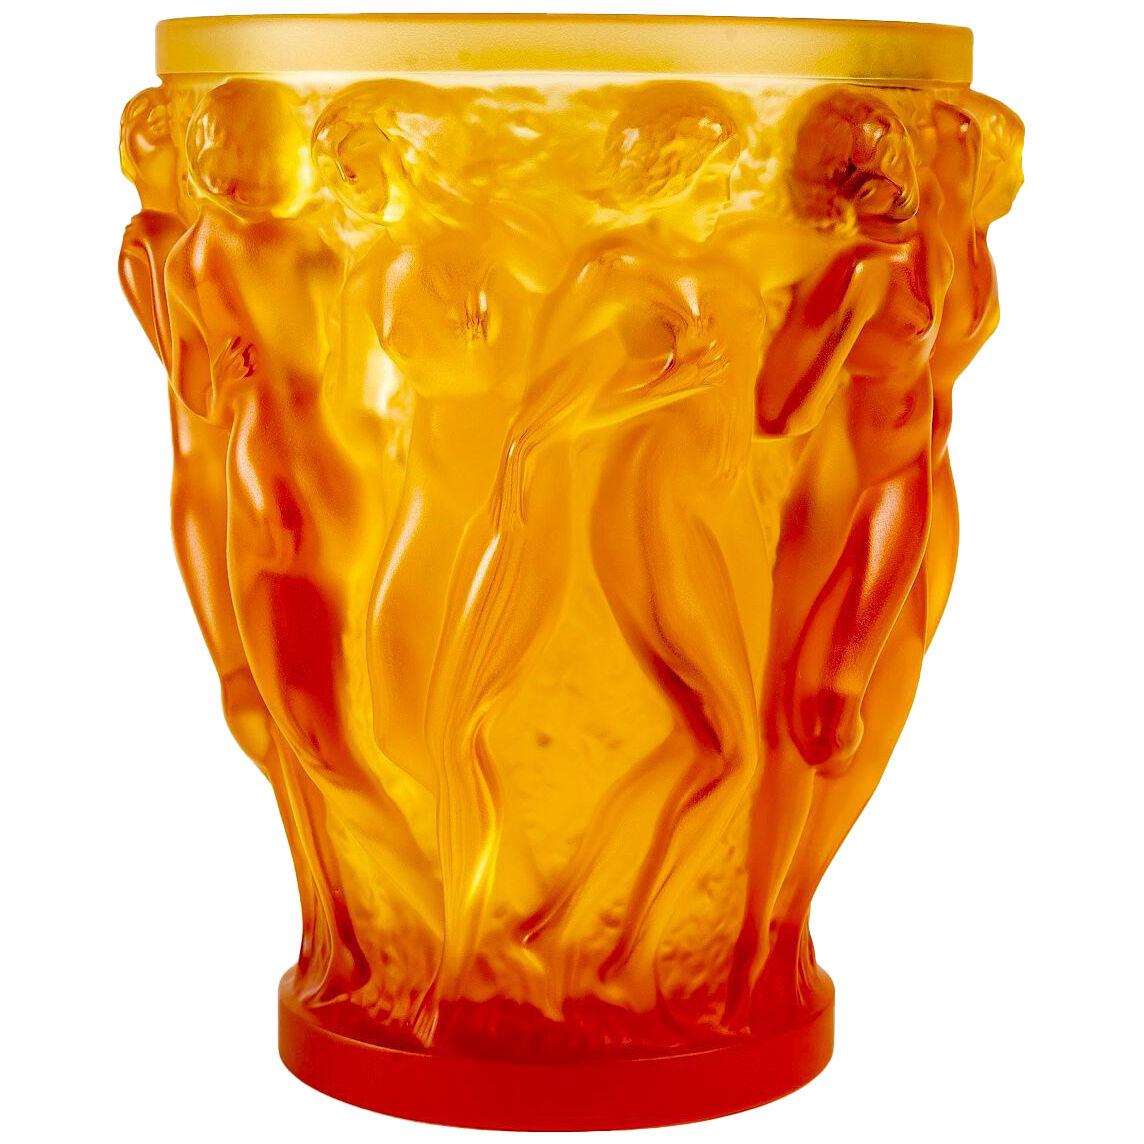 2007 Lalique France Vase Bacchantes Amber Crystal Limited Edition New